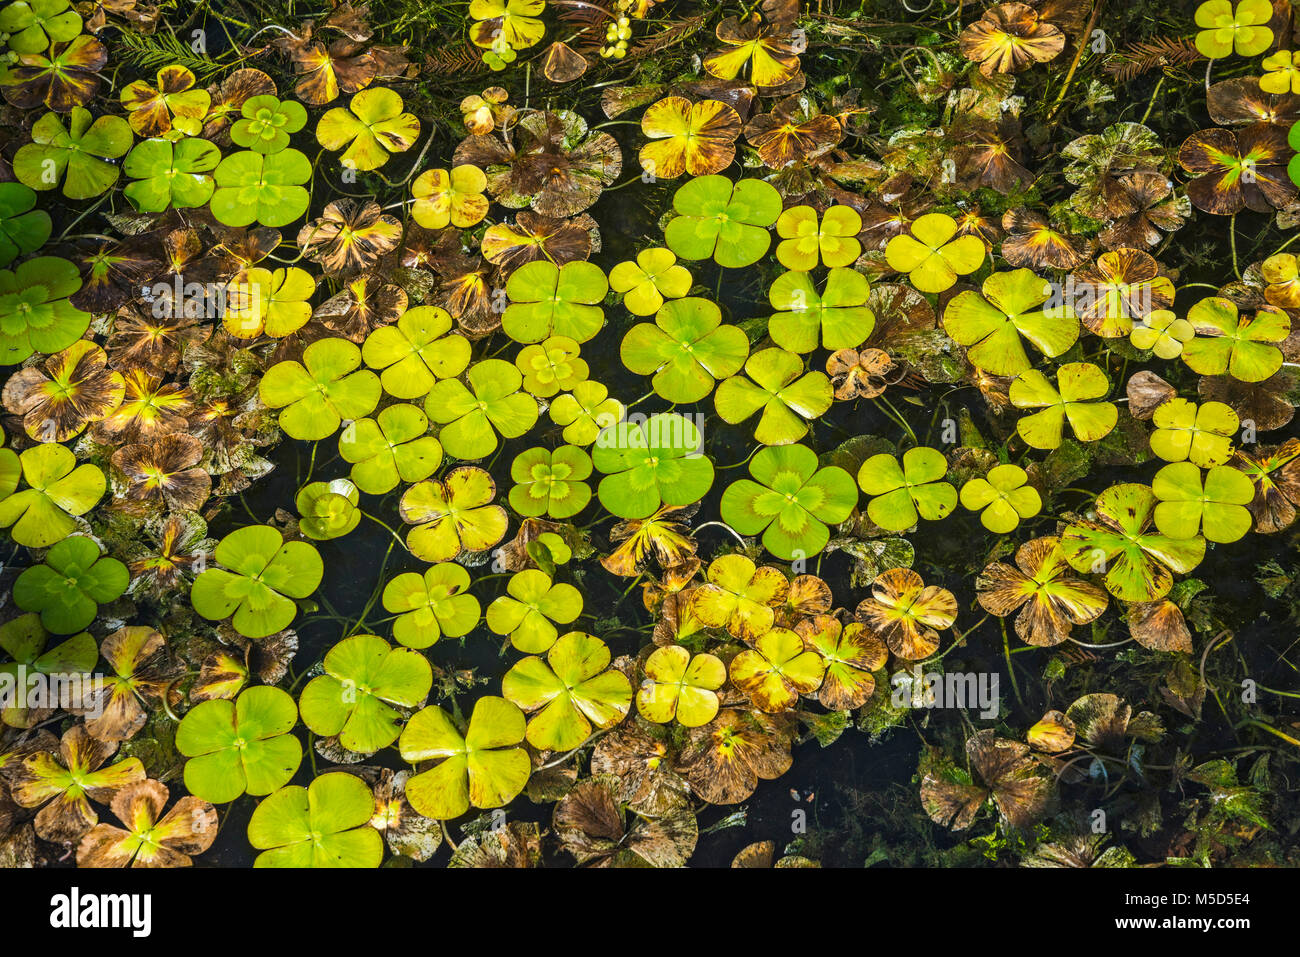 A floating water clover growing in an aquatic garden setting in North Central Florida. Stock Photo